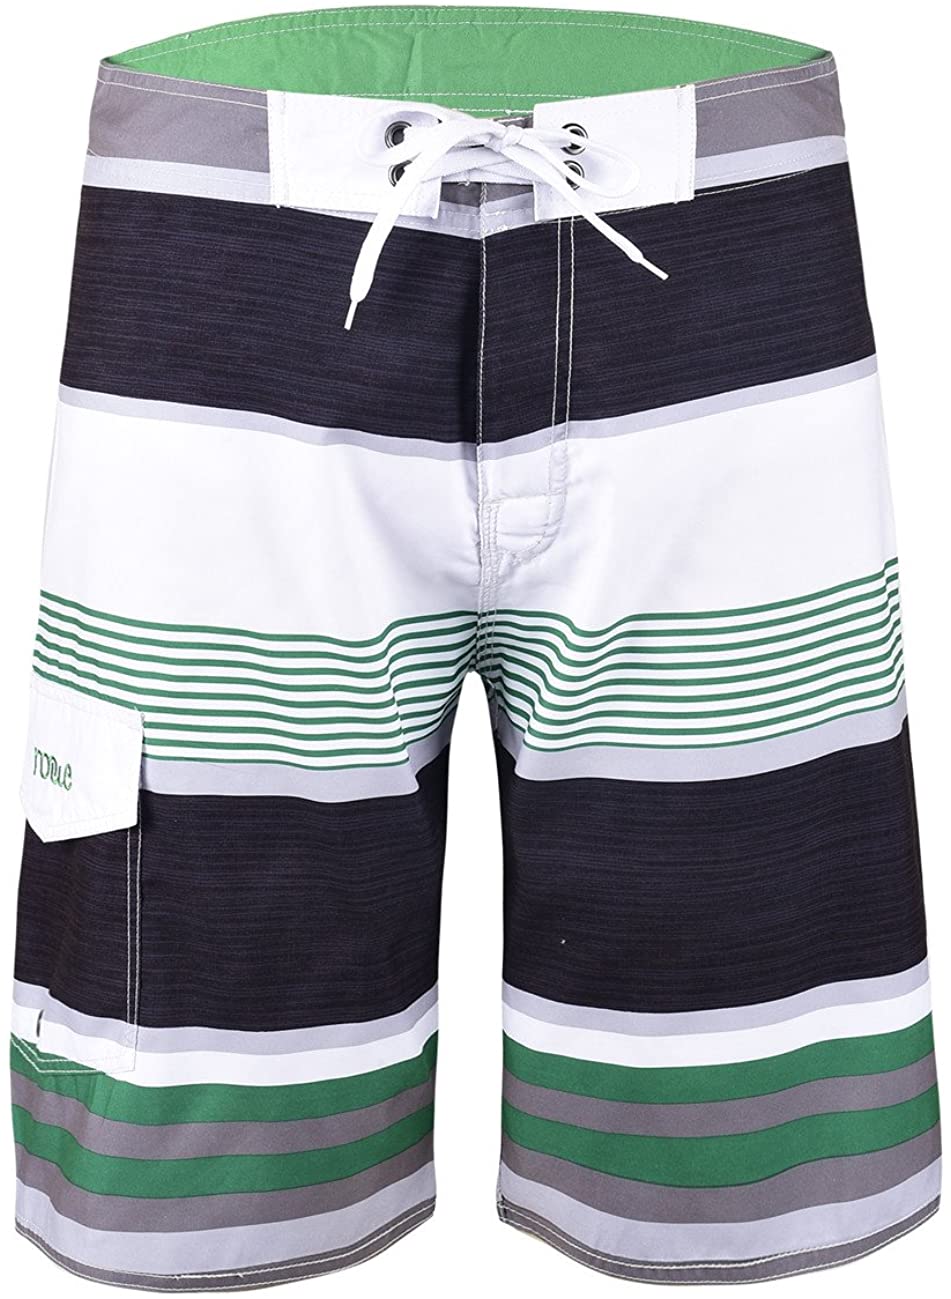 Nonwe Mens Quick Dry Swim Trunks Colorful Stripe Beach Shorts with Mesh Lining 